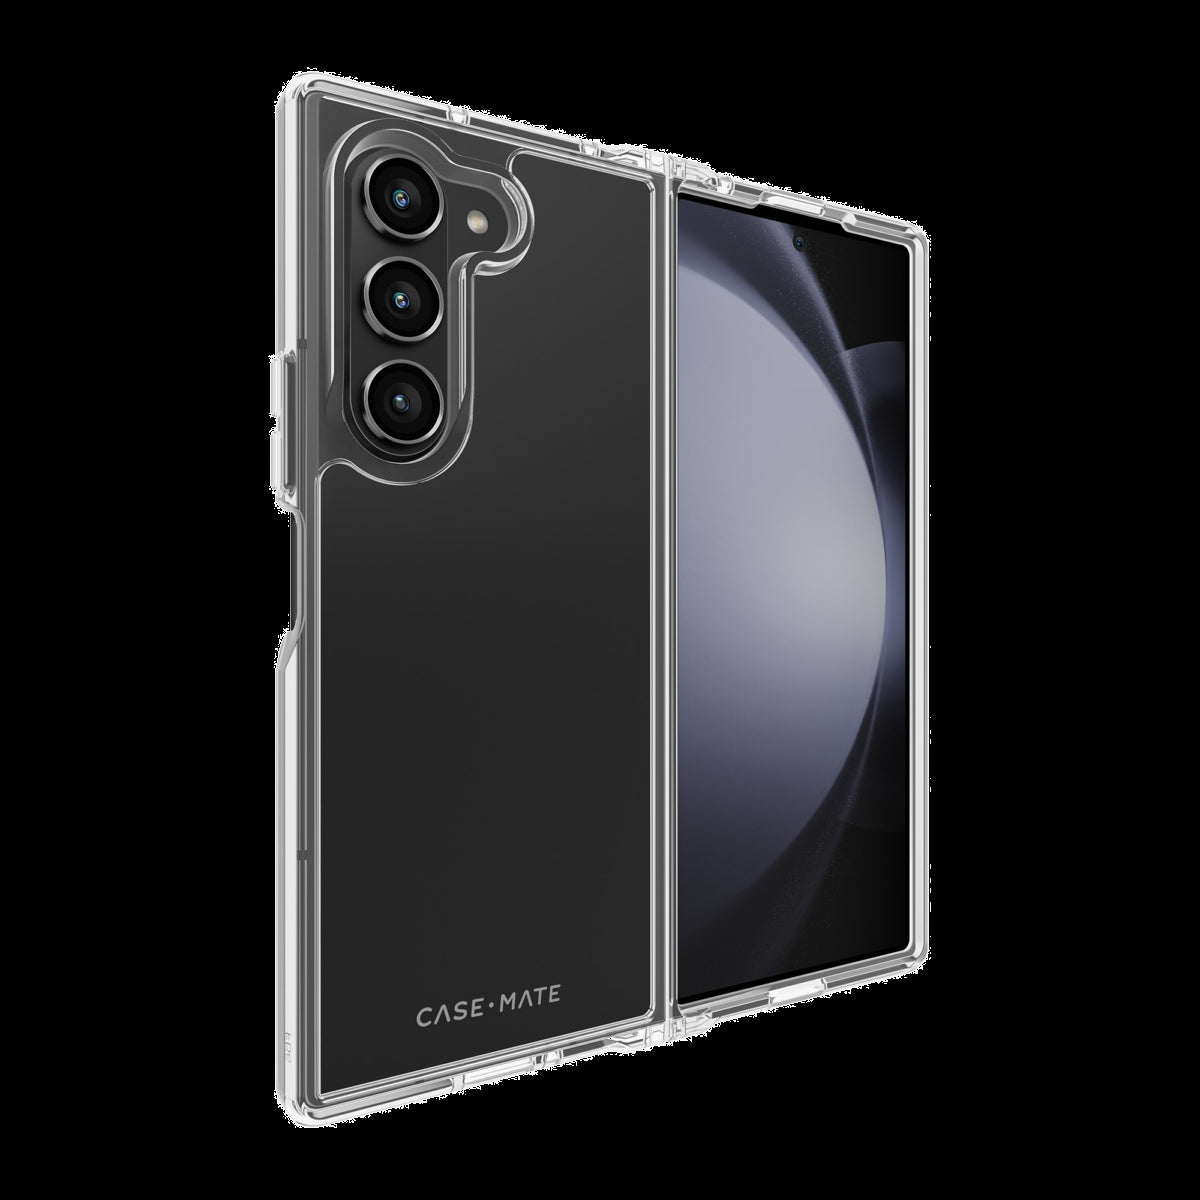 Designed with foldable devices in mind, the Case-Mate Tough Clear features 12-foot drop protection and a one-piece crystal clear design that will fit every occasion.